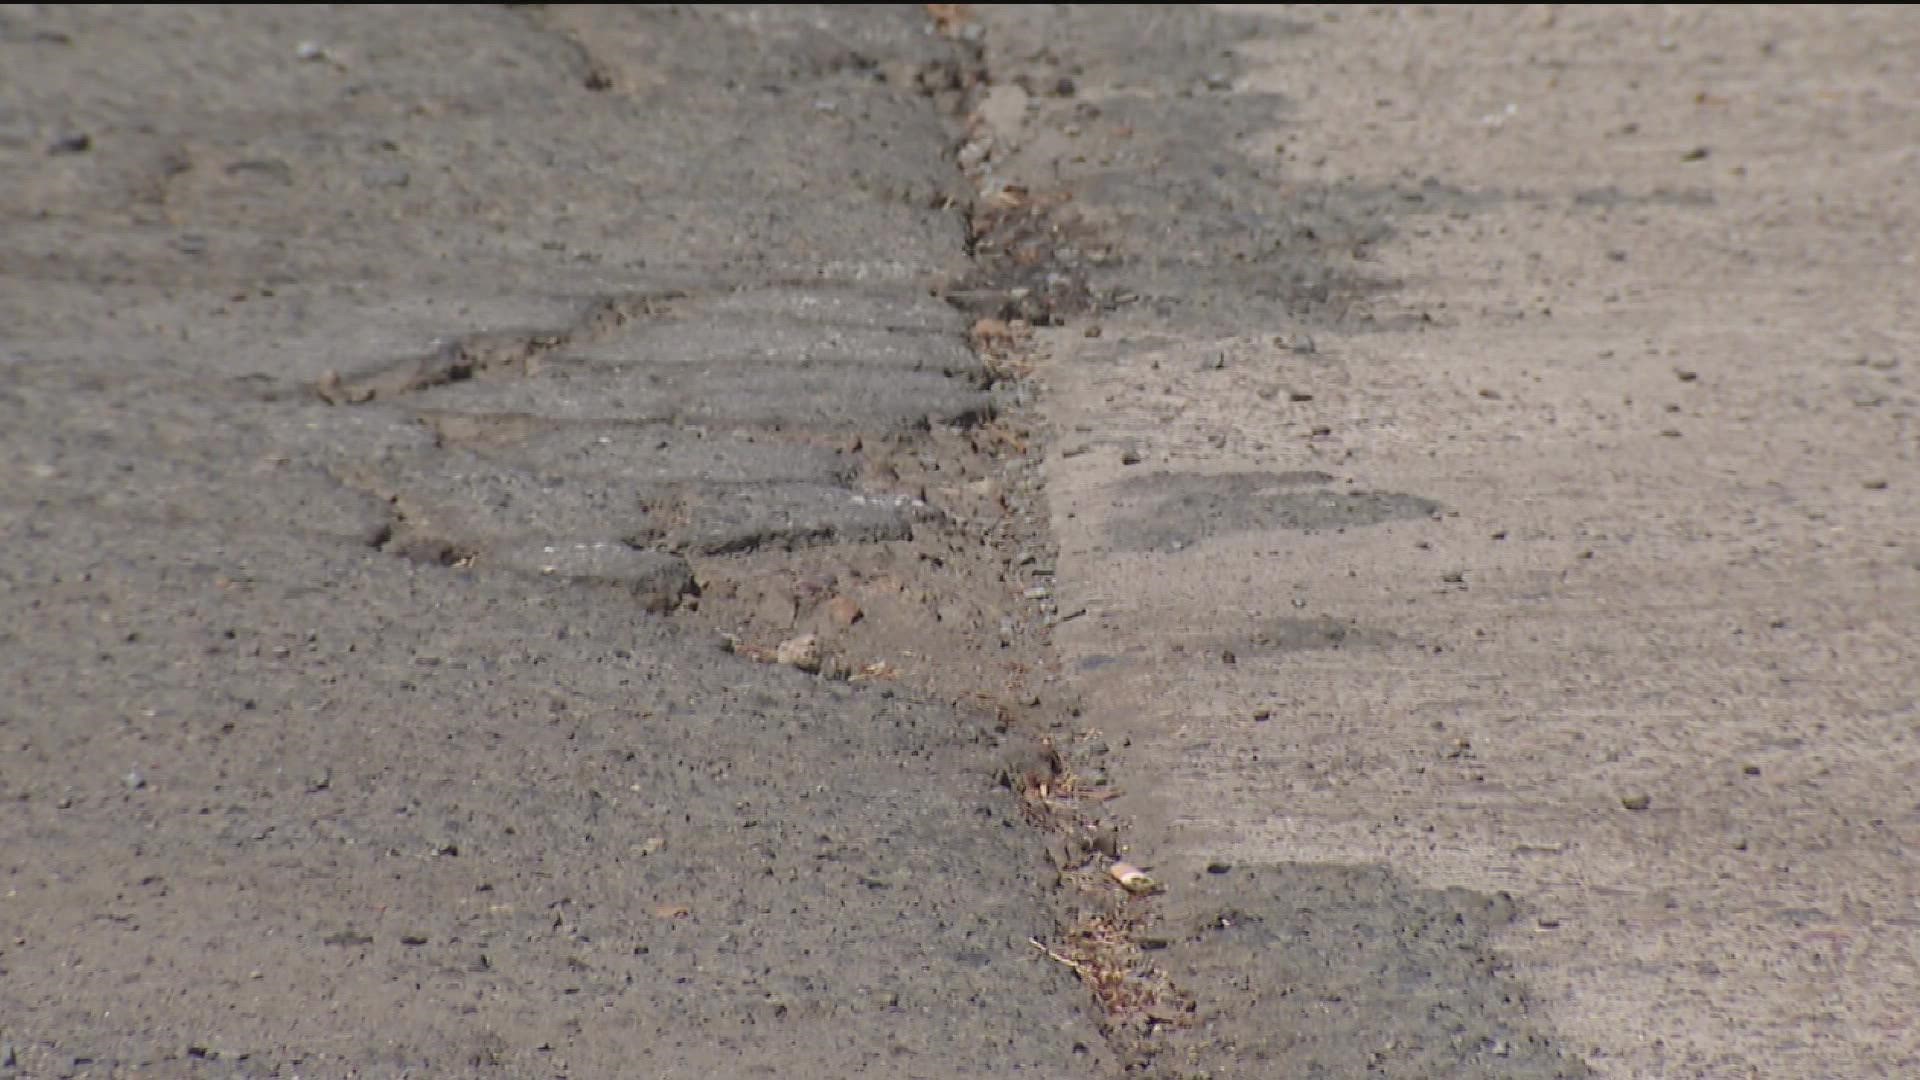 Residents have filed several reports to have streets repaved but the city says there is no funding